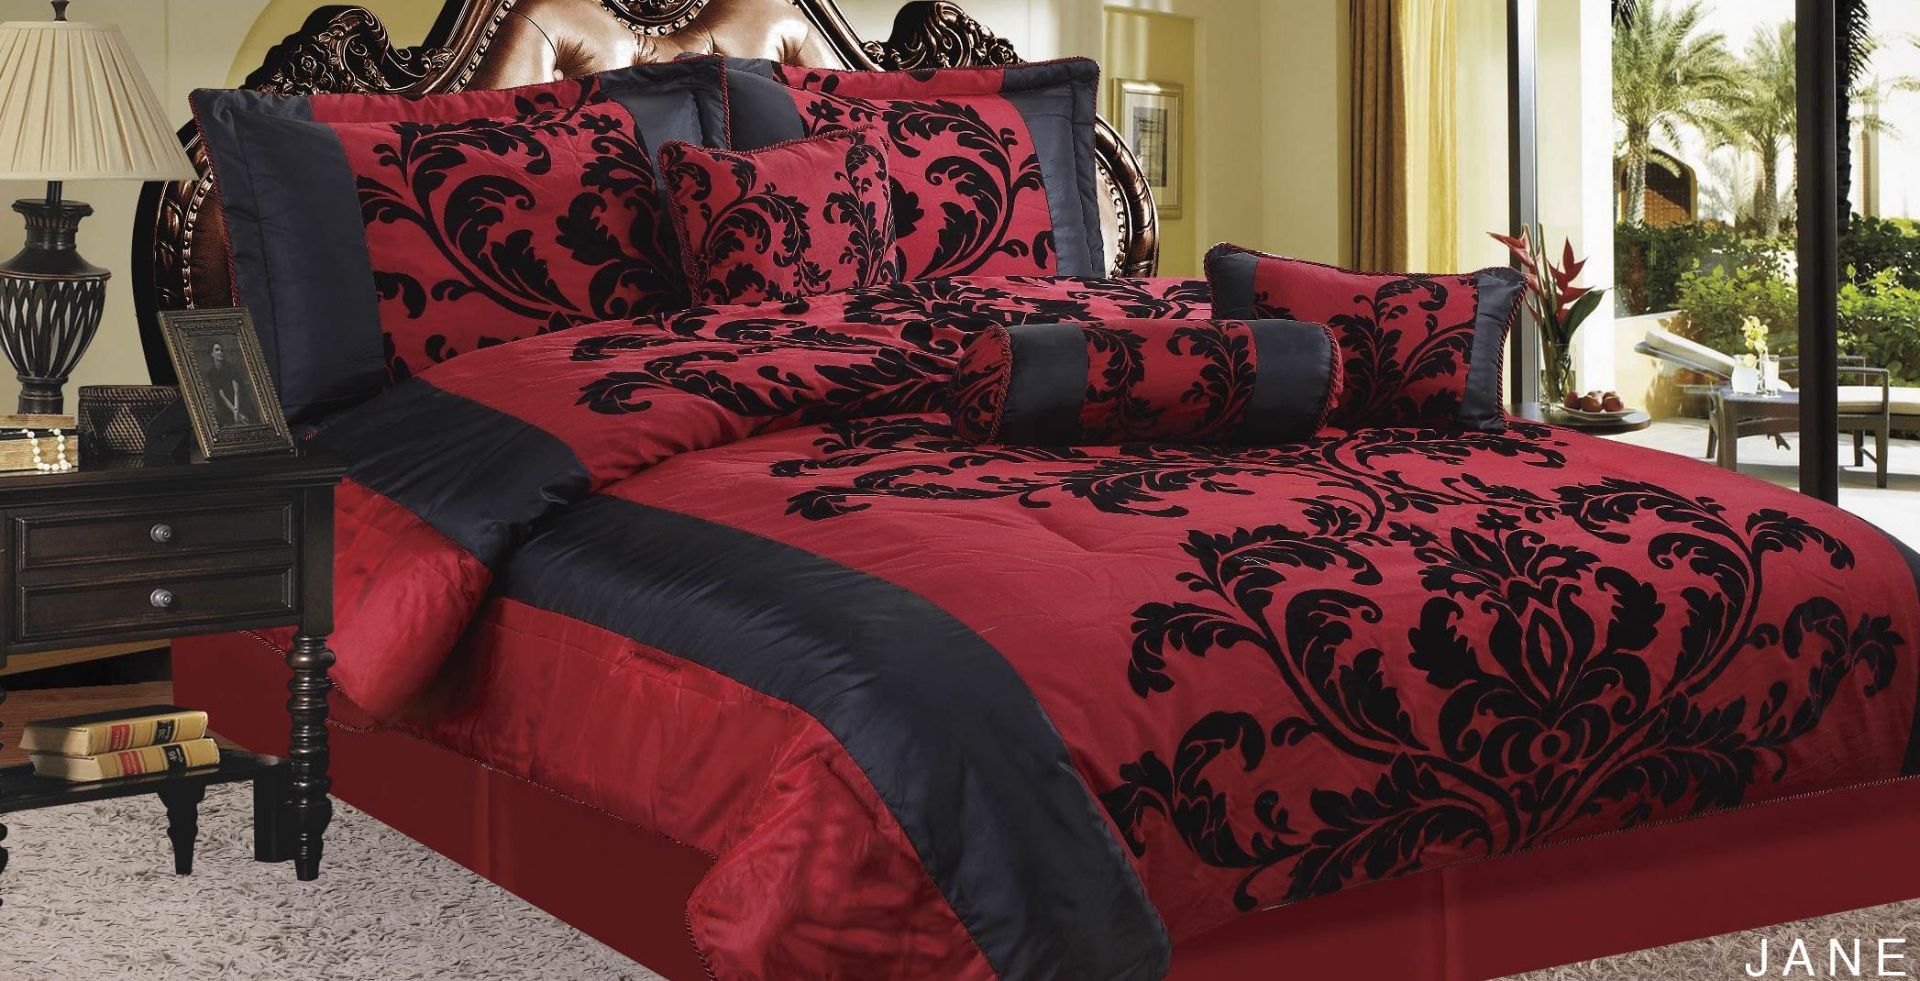 V 3pce Jane Red And Black King Size Bedspread And Pillowcase Set RRP79.99 X  2  Bid price to be